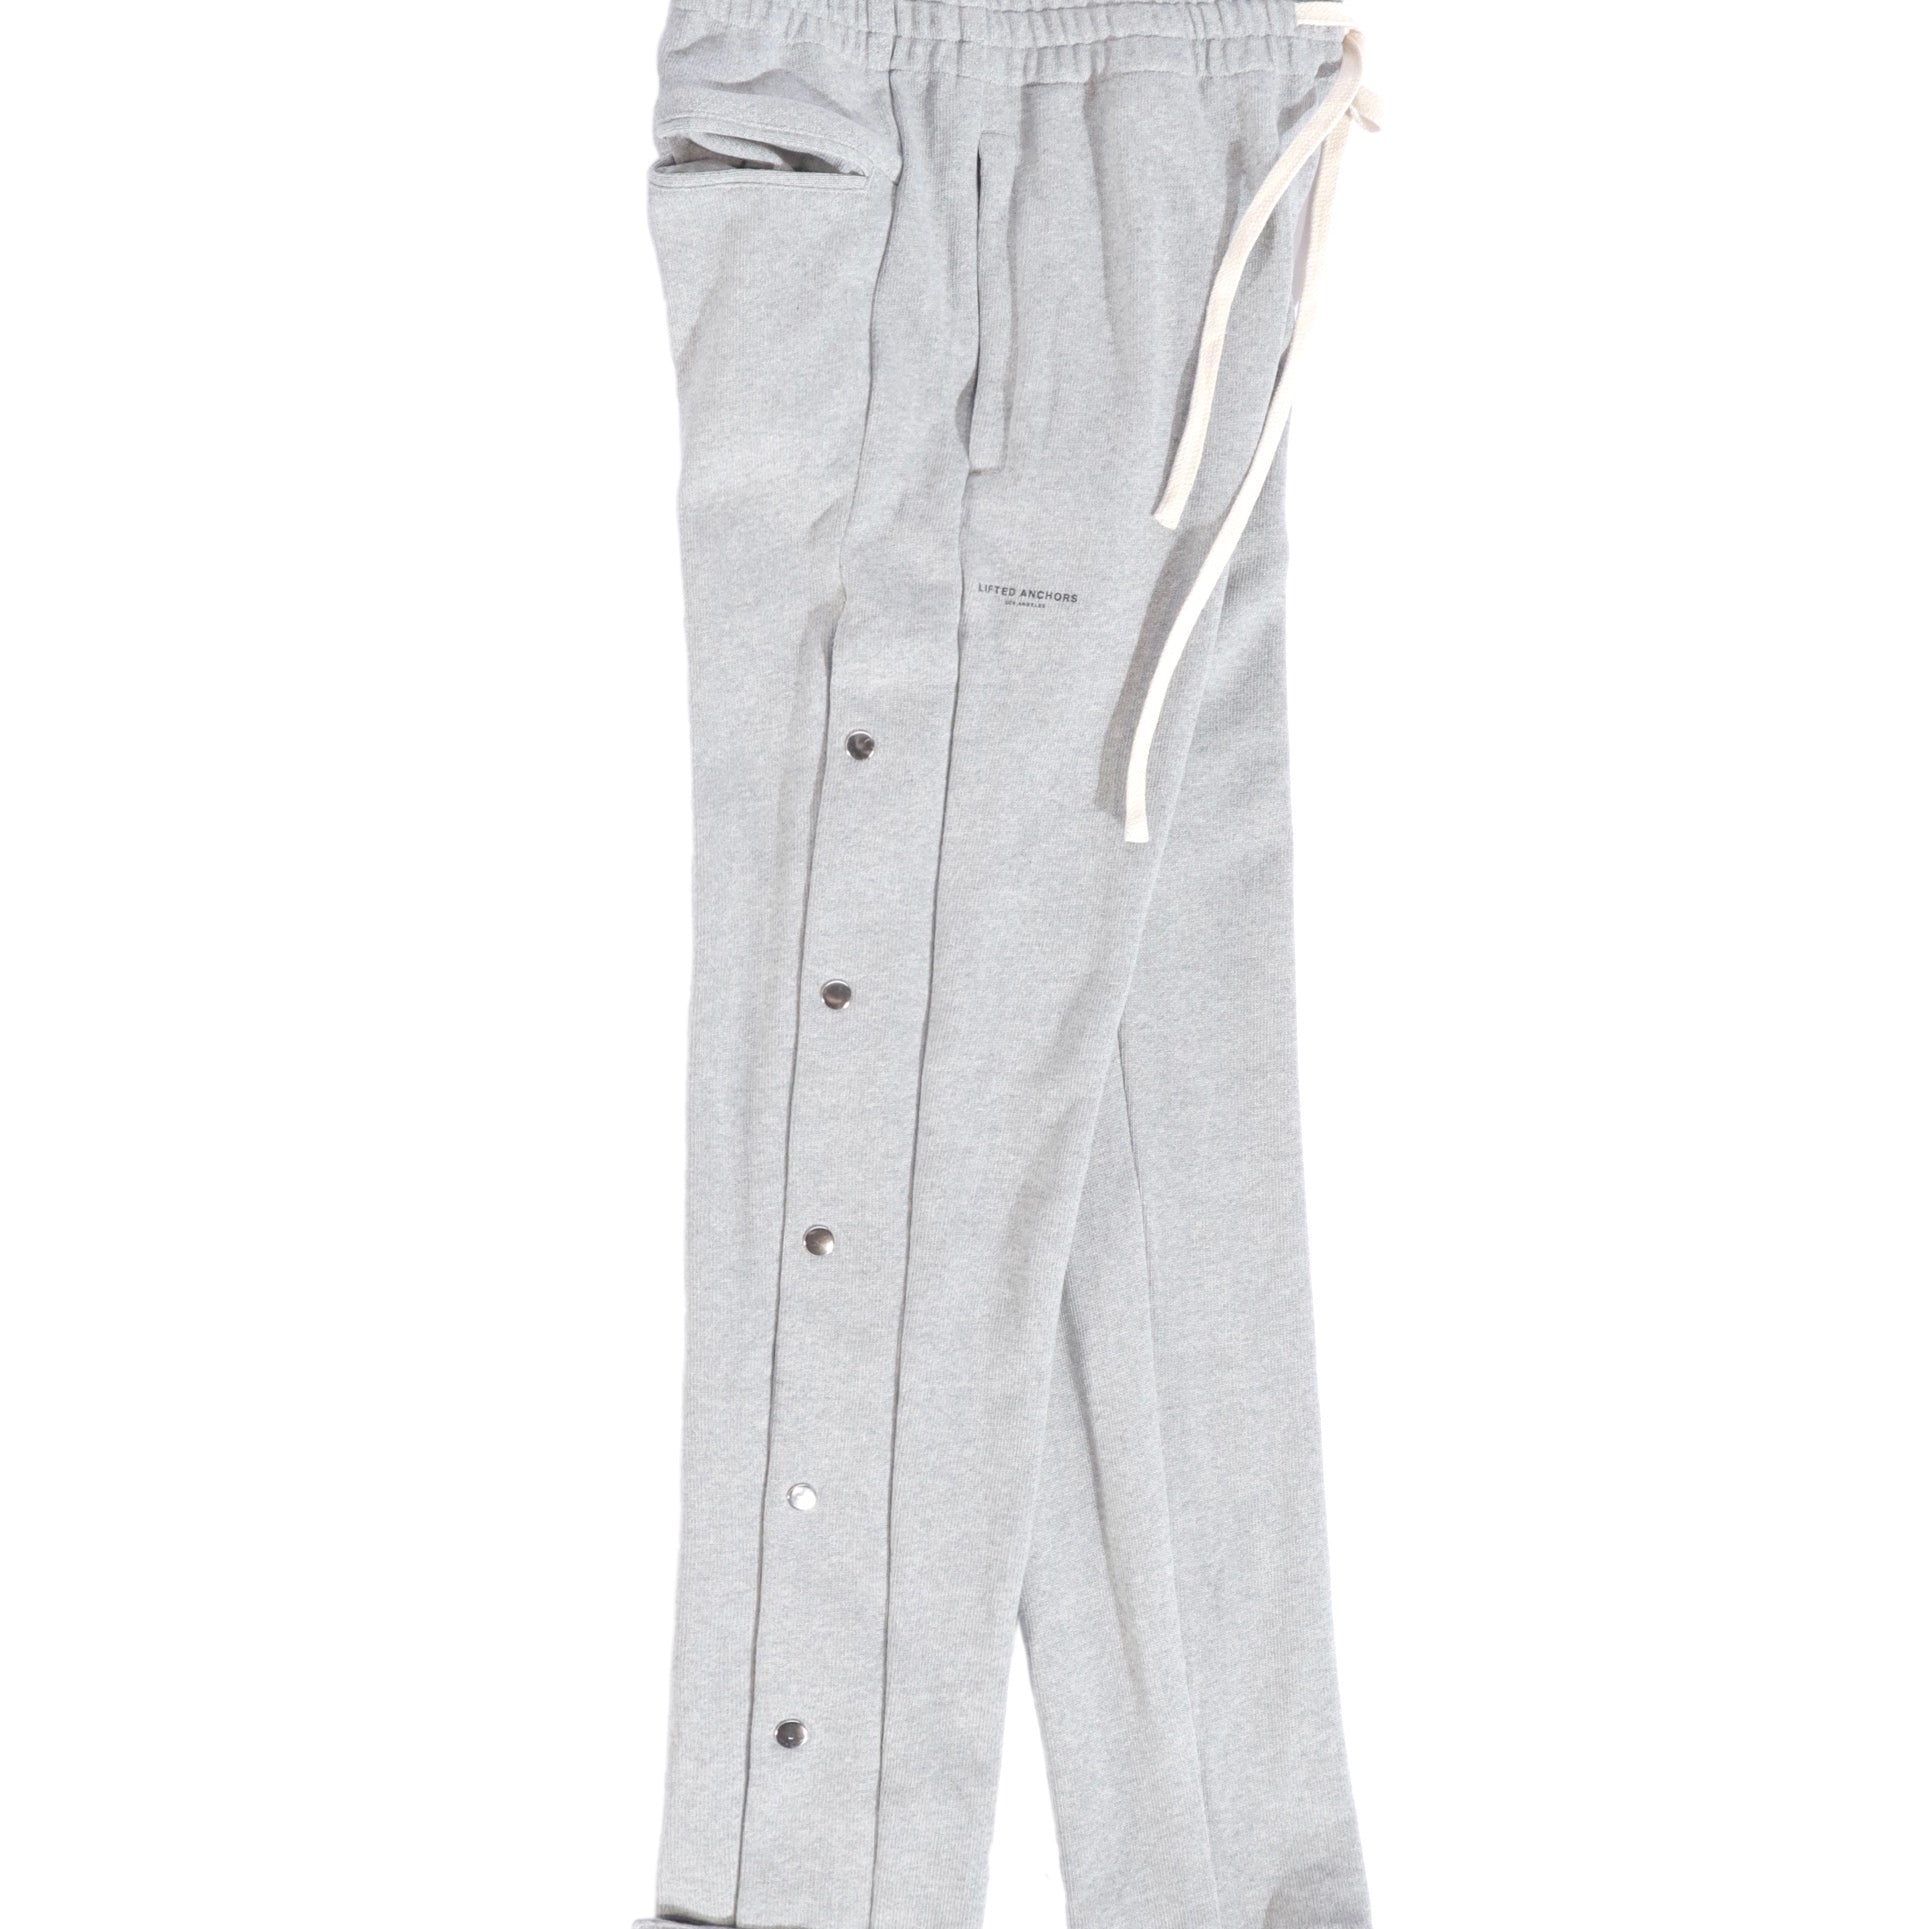 NBA Jogging Pants for sale on  in Cameroon